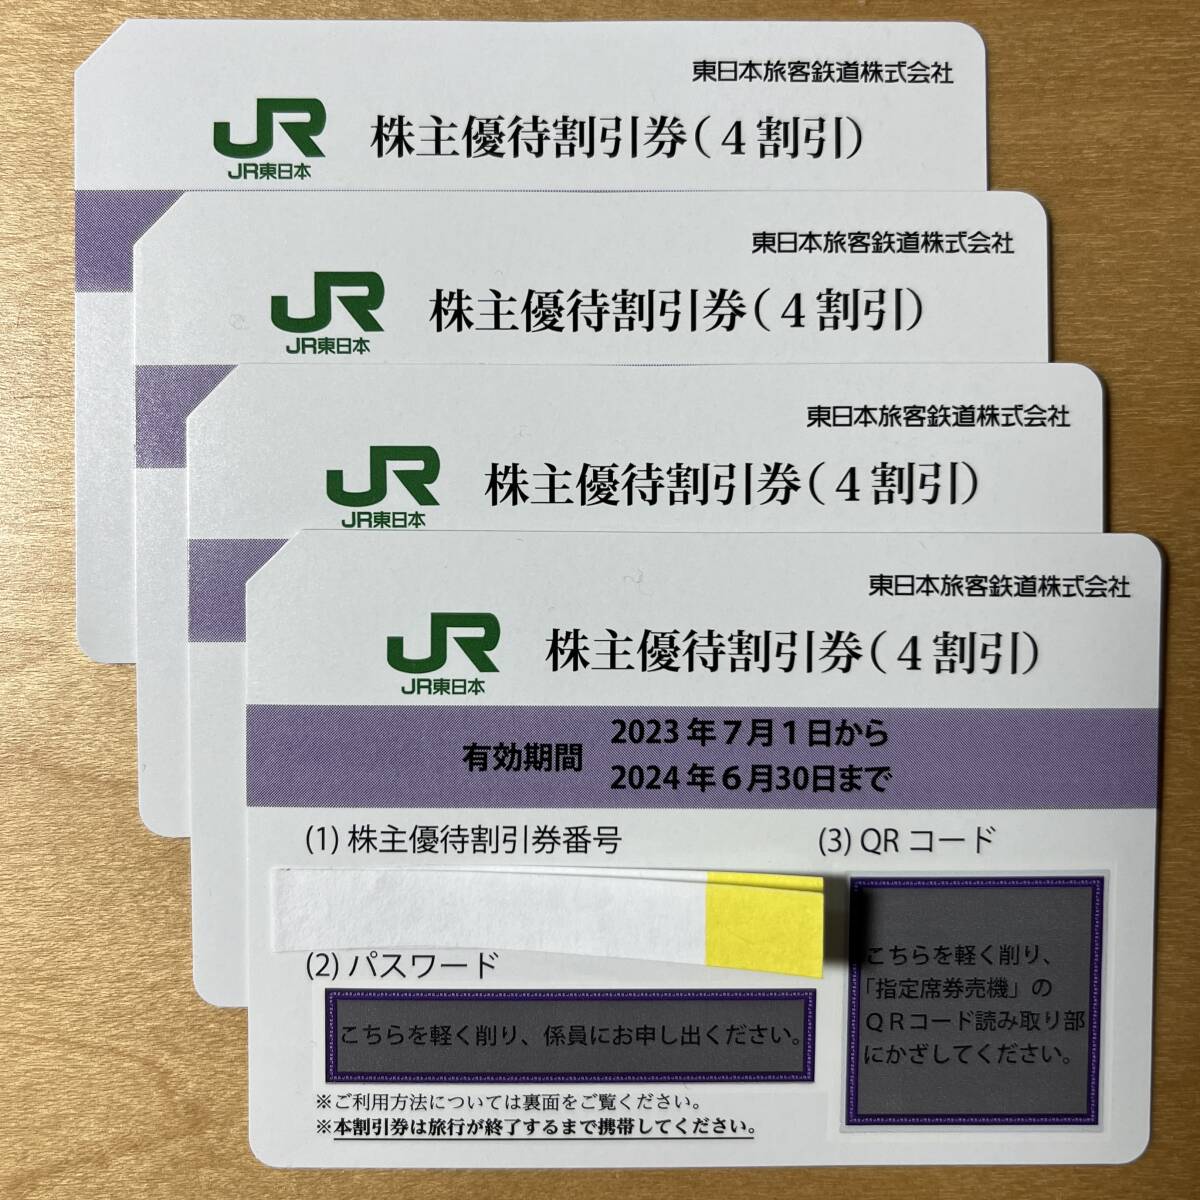 JR East Japan stockholder complimentary ticket 4 pieces set ②( cat pohs shipping postage included )